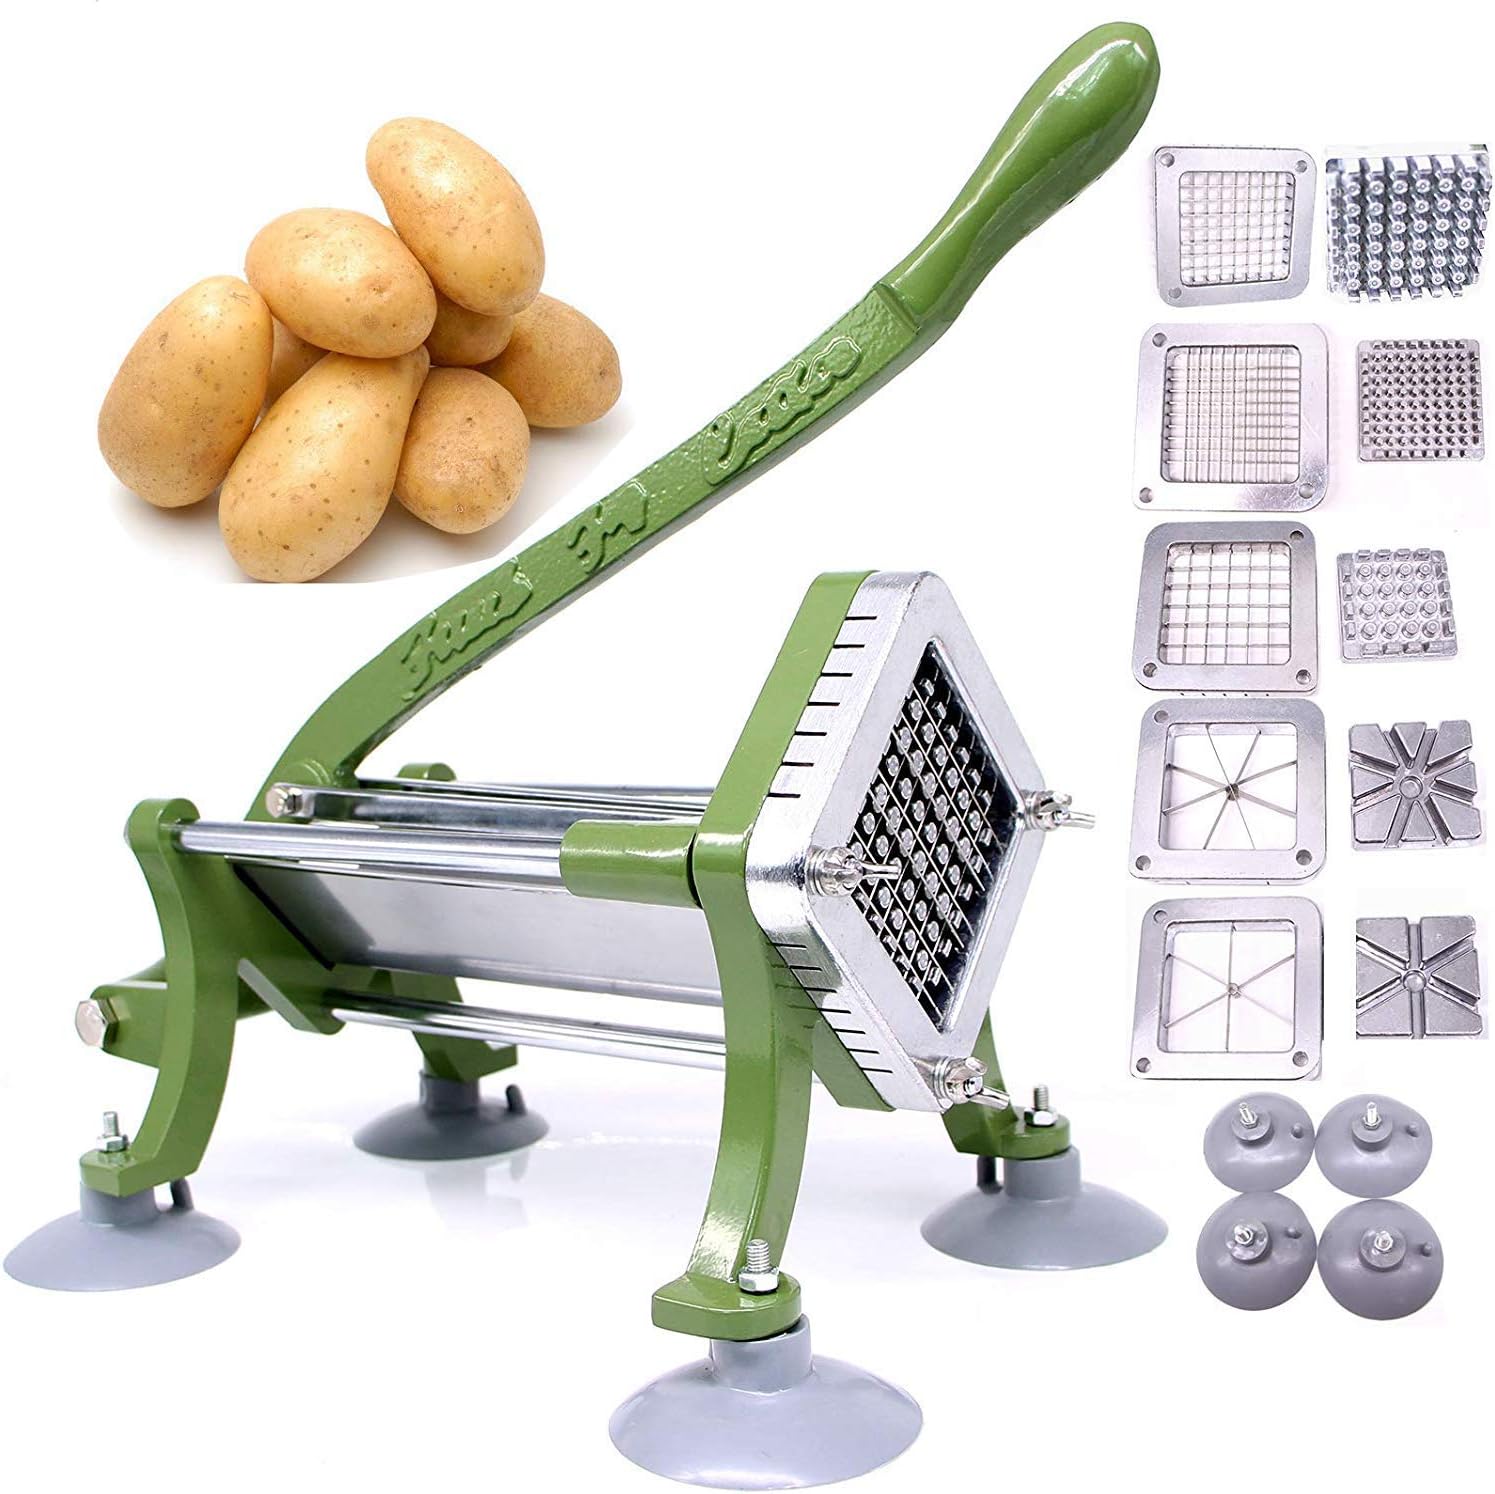 Buy SHSYCER French Fry Cutter Commercial Potato Slicer with Suction Feet  Complete Set, Includes 1/4, 3/8,1/2,8 Pieces,6 Pieces Online in Pakistan.  B07XPLKVBW